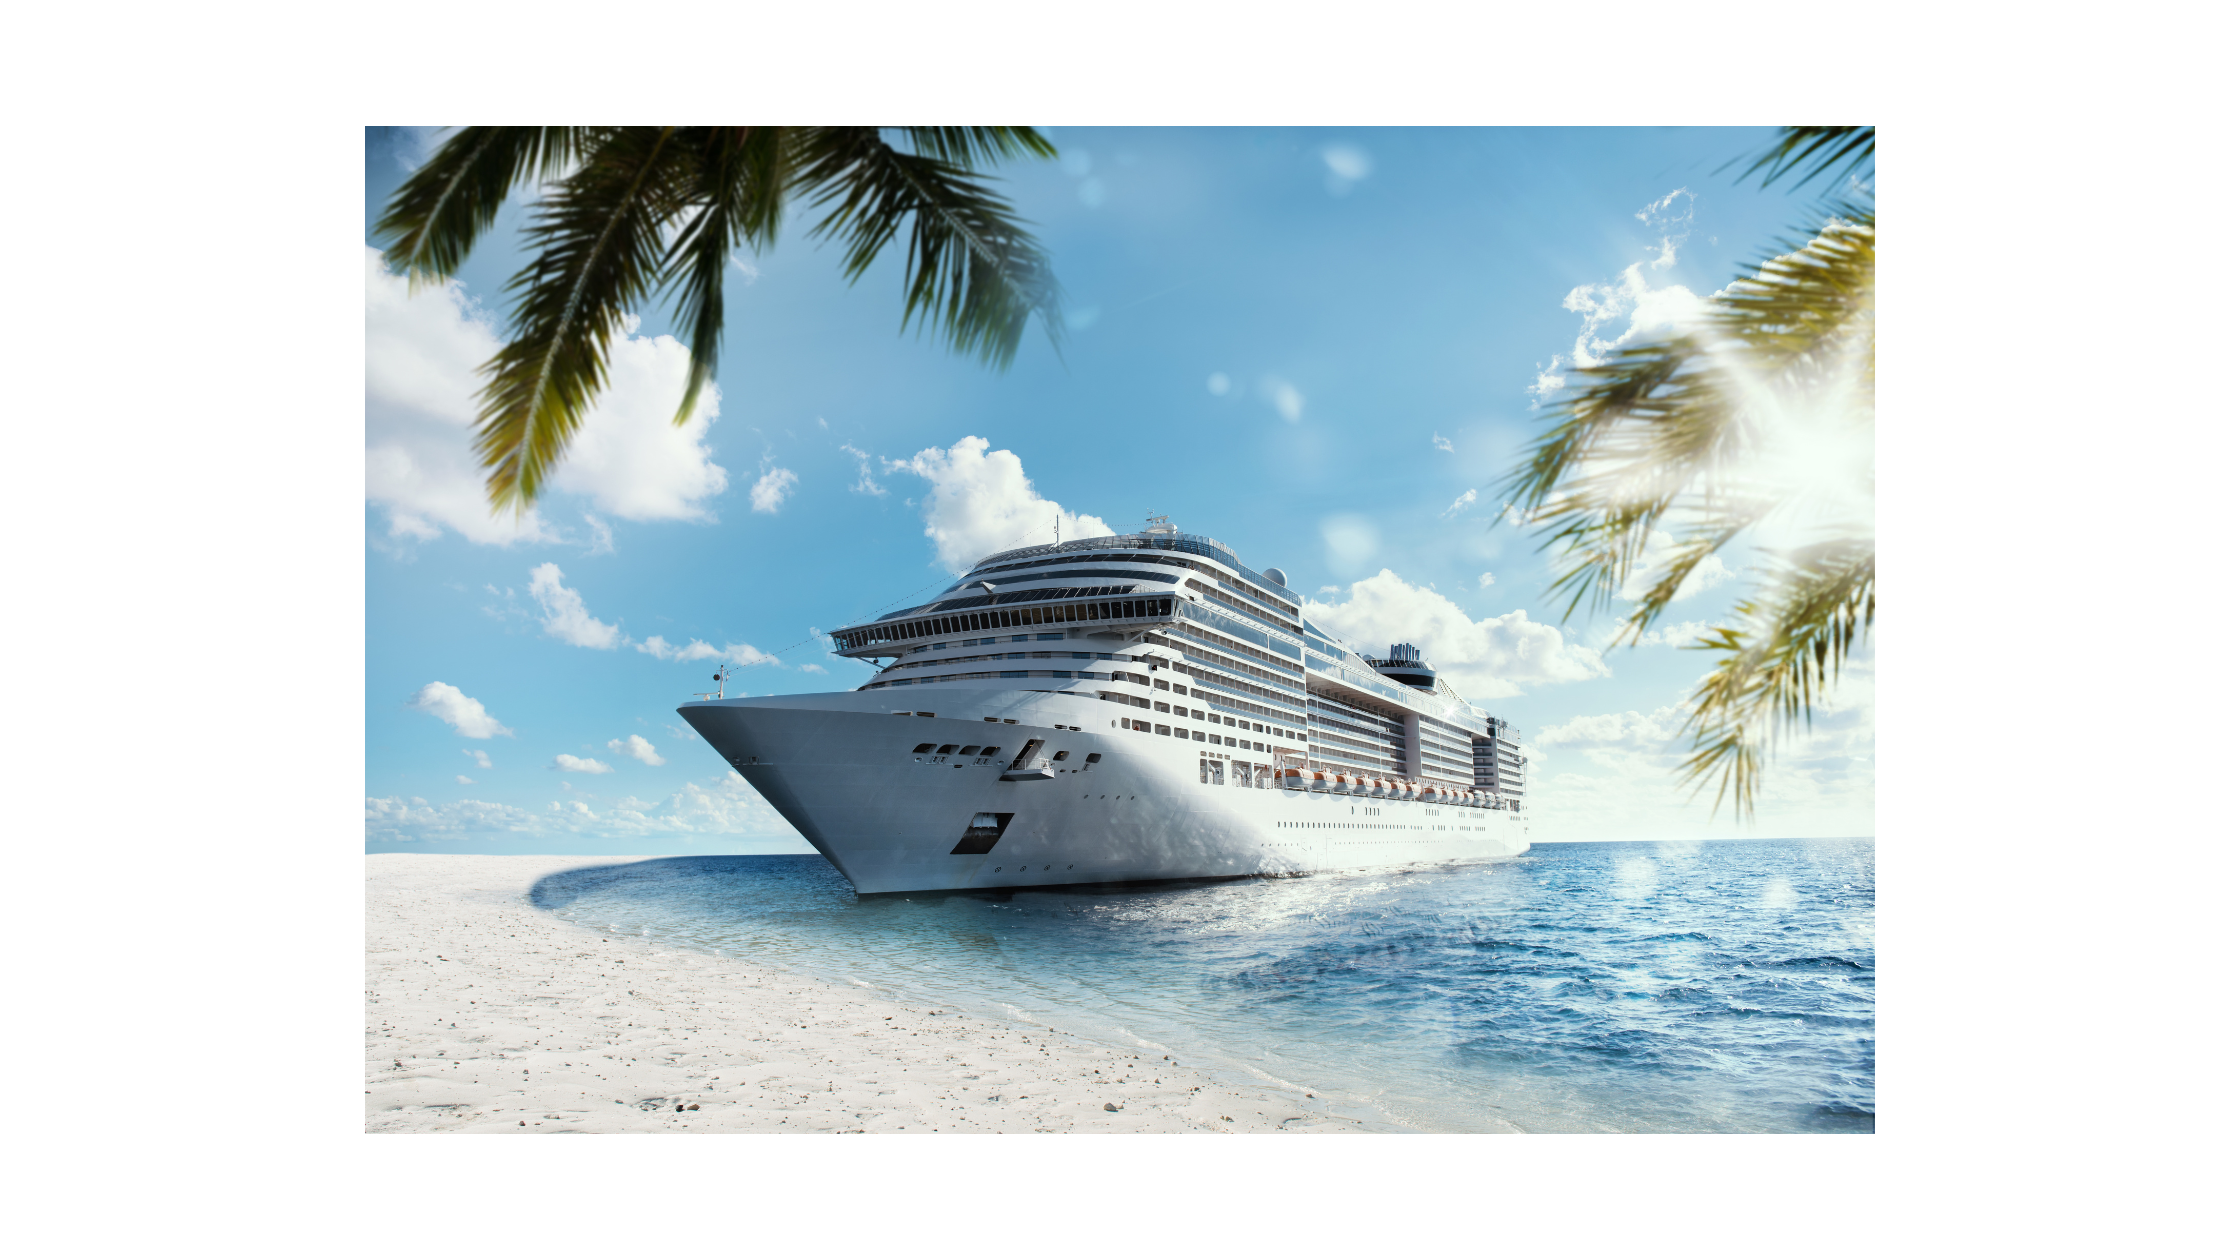 Planning a Cruise?